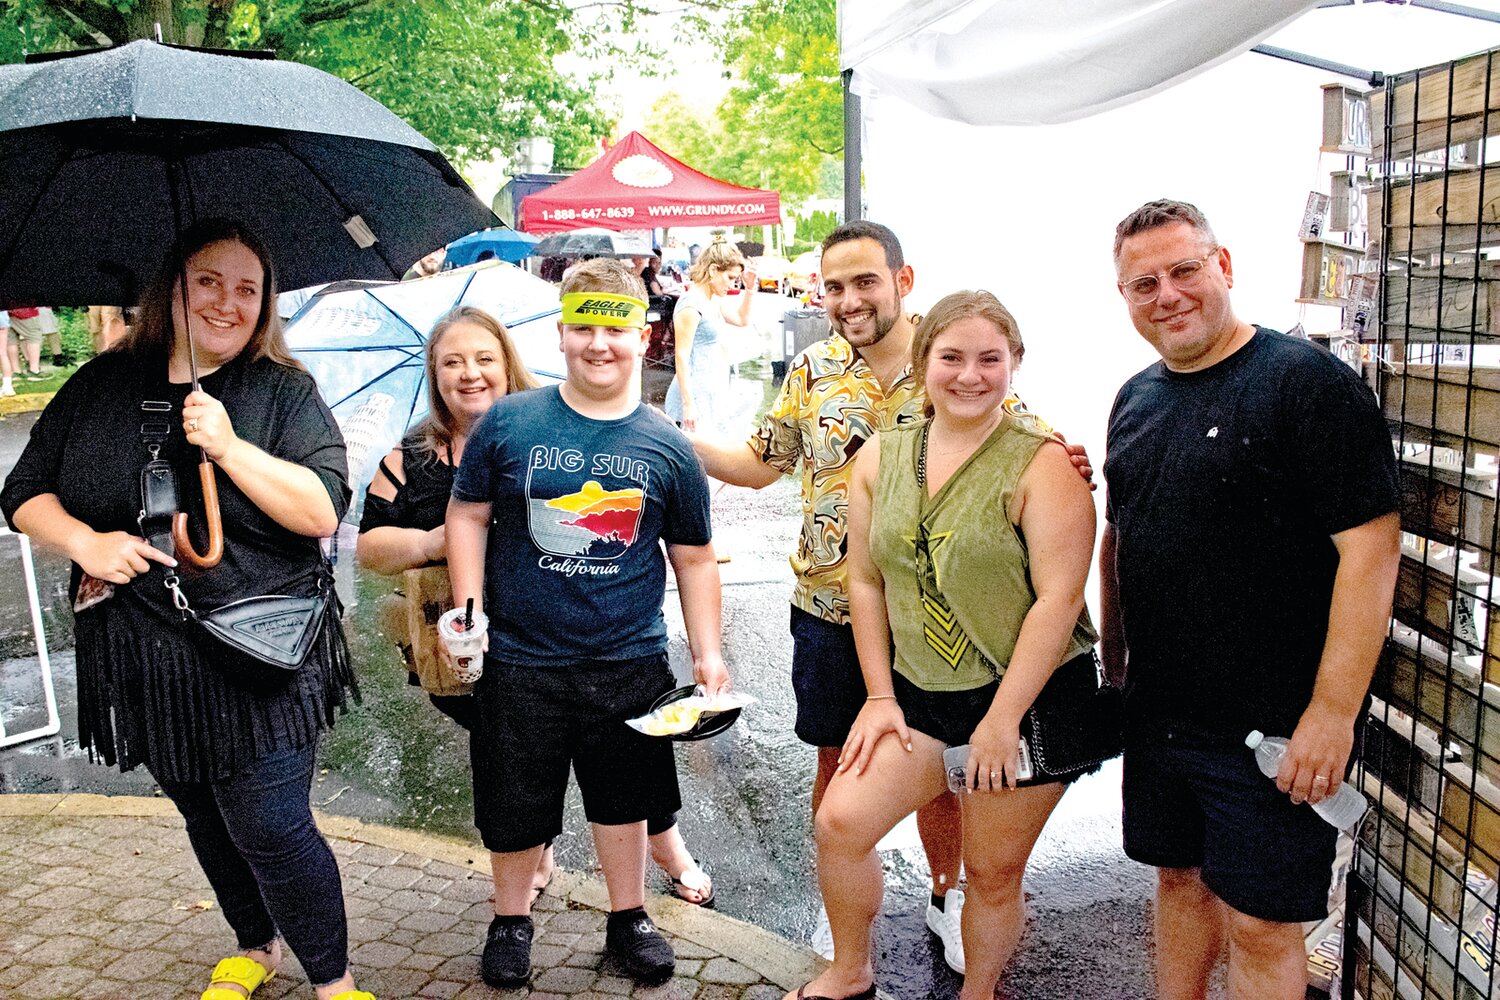 The Mullers of Bucks County and the Bronshtein family, visiting from Florida, take cover from the downpour during the car show.